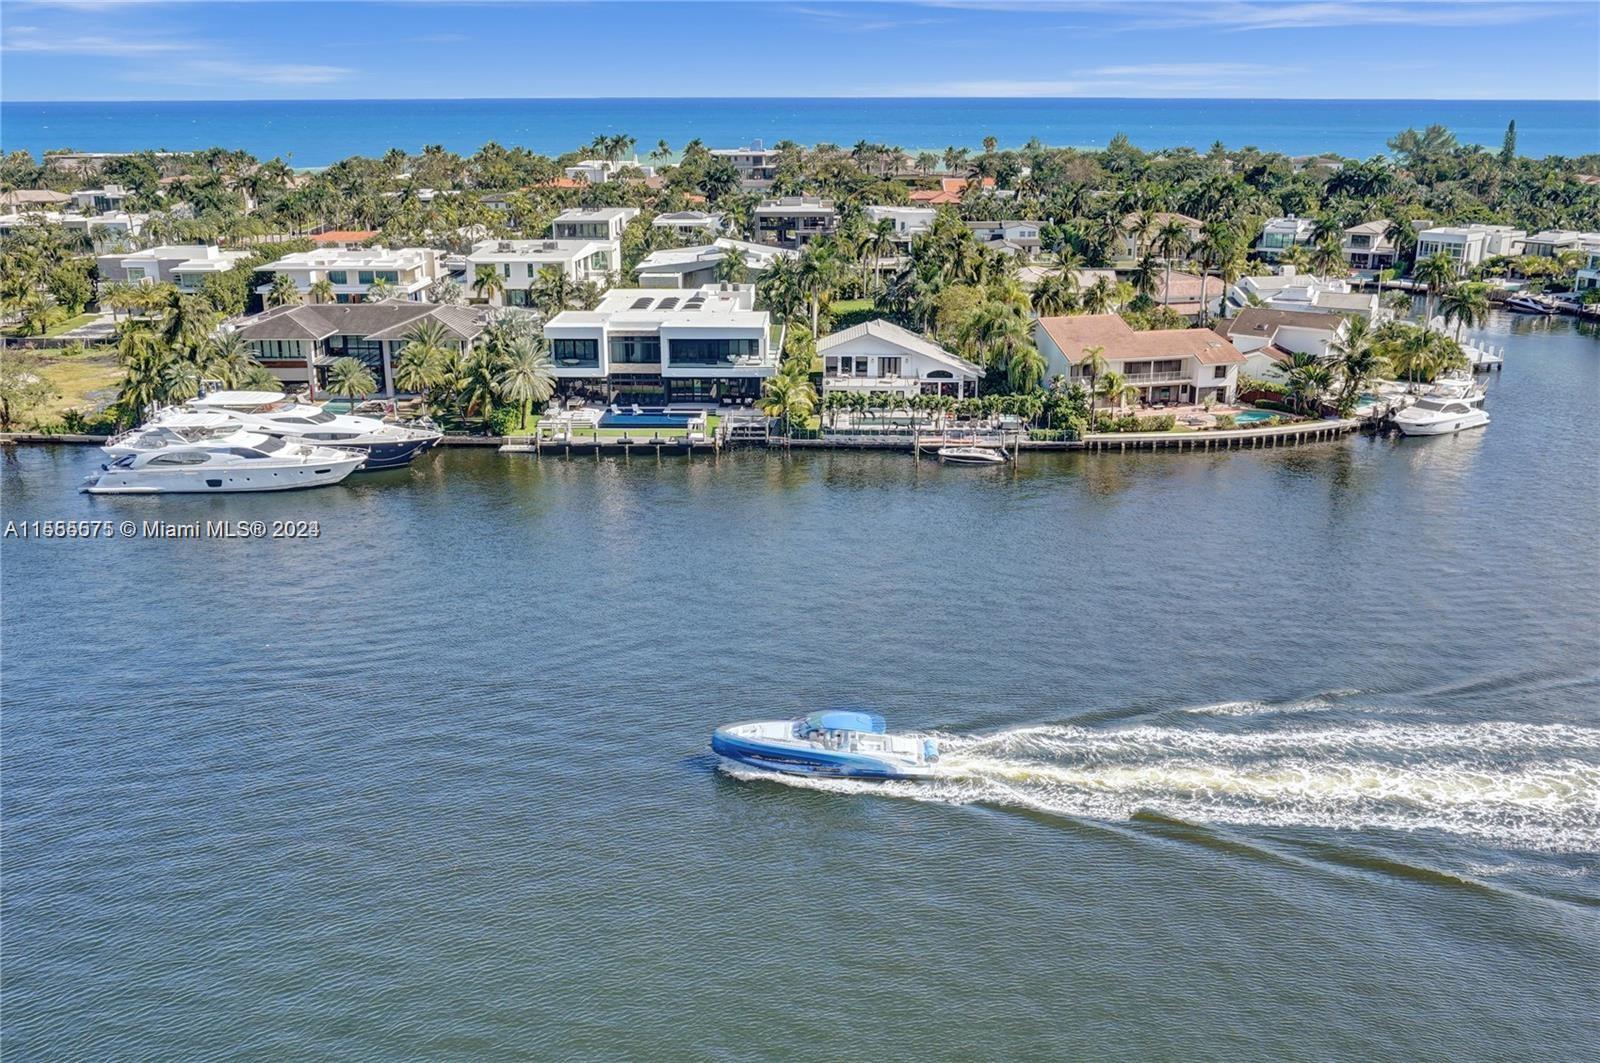 Step into this expansive, waterfront, flow-through unit with magnificent unobstructed Direct Ocean, Intracoastal & PGA Golf Course Views! This 3,000 SQ FT of luxury living space offers, a PRIVATE ELEVATOR, Enormous living room, Formal dining room, Open kitchen, Two spacious balconies, Custom built walk-in closet, Separate oversized laundry room w/extra full bathroom. Den is enclosed with double French door and is used as a third bedroom. Luxury style amenities include: Infinity Lap Pool, 100 Seat Movie Theater, 4 Tennis Courts, State-of-the-Art Fitness Center, Exclusive Restaurant, Internet Café, Kids room, BBQ, Elegant building lobby and concierge at the front desk. Just minutes to the beach, 3.5 mile walking and biking path, restaurants, shopping, major highways and Excellent Schools!